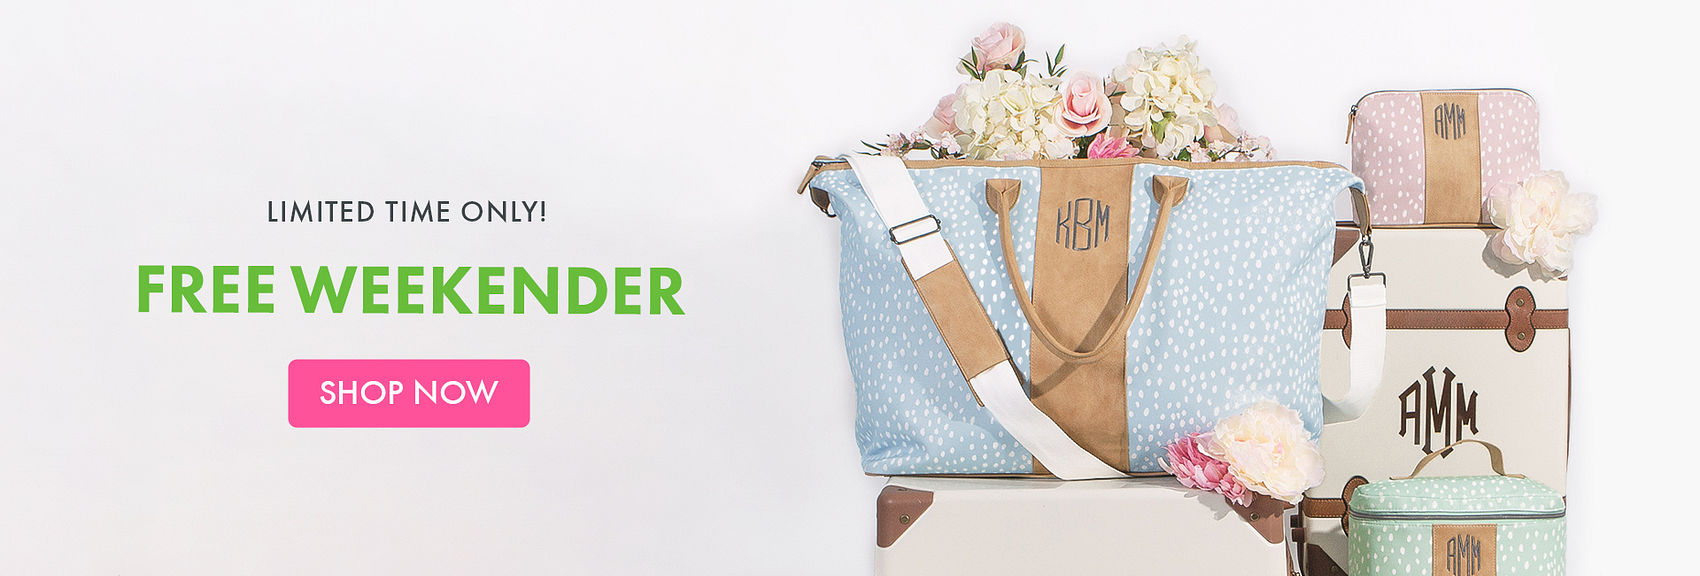 Claim your FREE Dottie Weekender with $100 purchase!